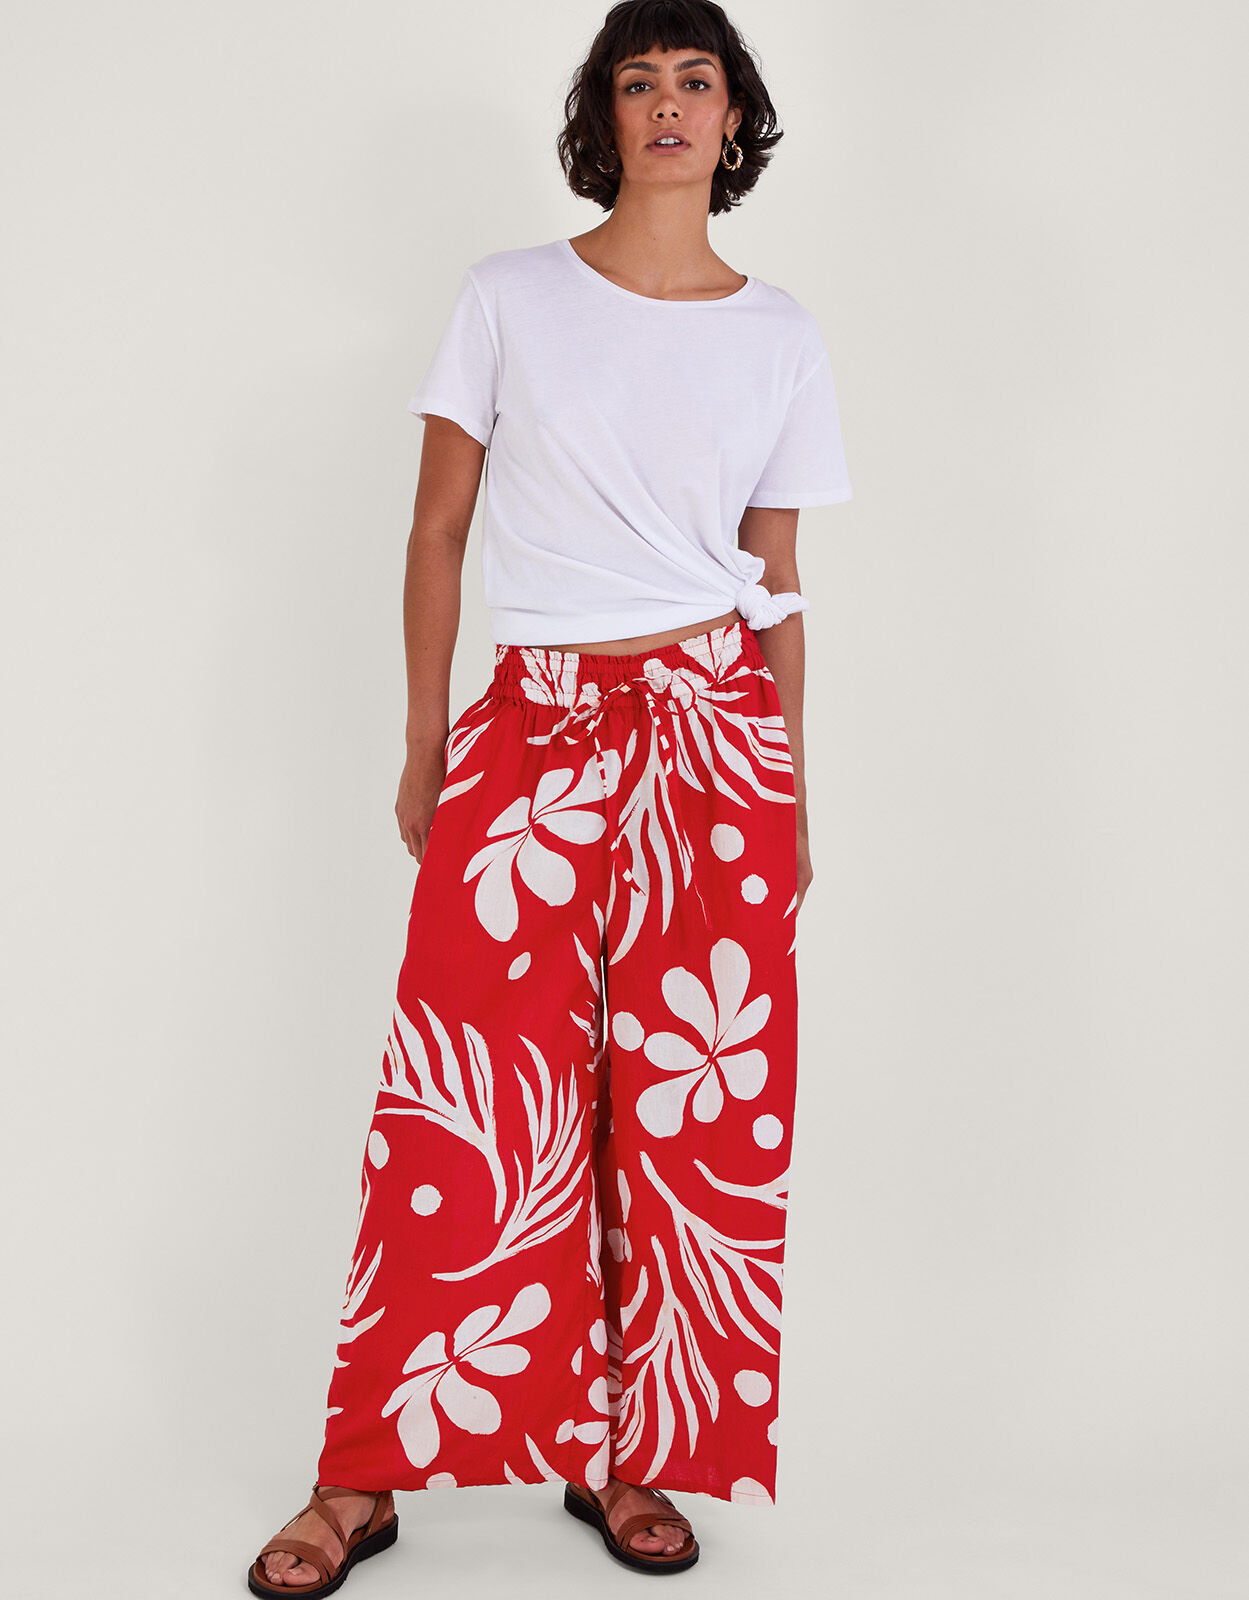 Floral Print High Weight Palazzo Boho Trousers For Women 17 Styles, Wide  Leg, S XL Perfect For Summer From Nbkingstar, $10.88 | DHgate.Com